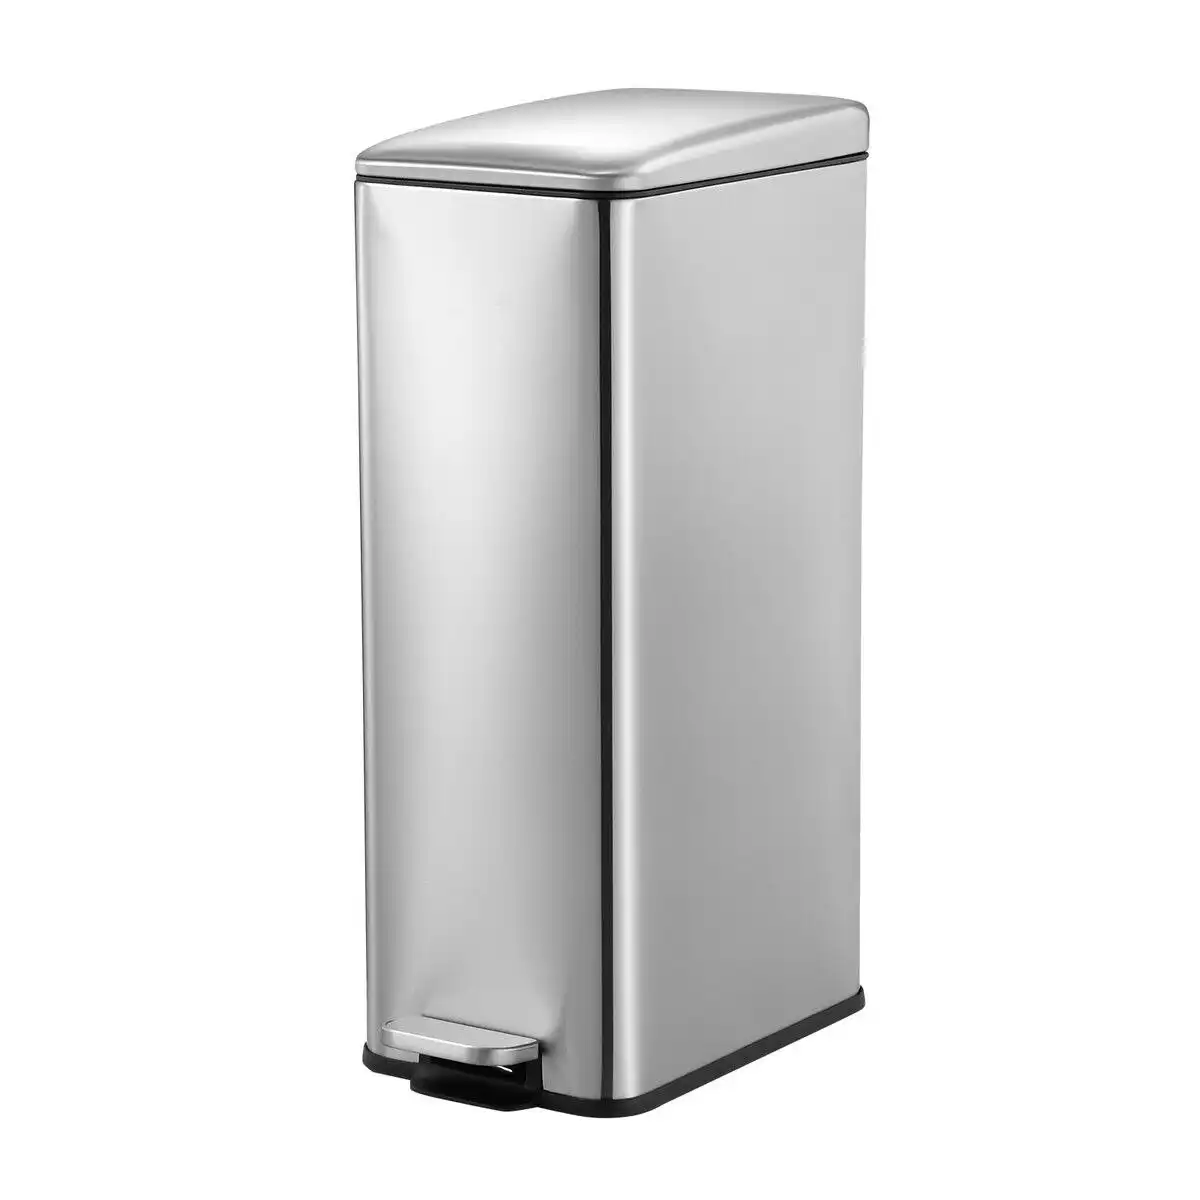 Maxkon Small Garbage Can Rubbish Pedal Bin Recycling Trash Waste Stainless Steel Rectangular Trashcan Soft Closing Kitchen House Indoor 20L